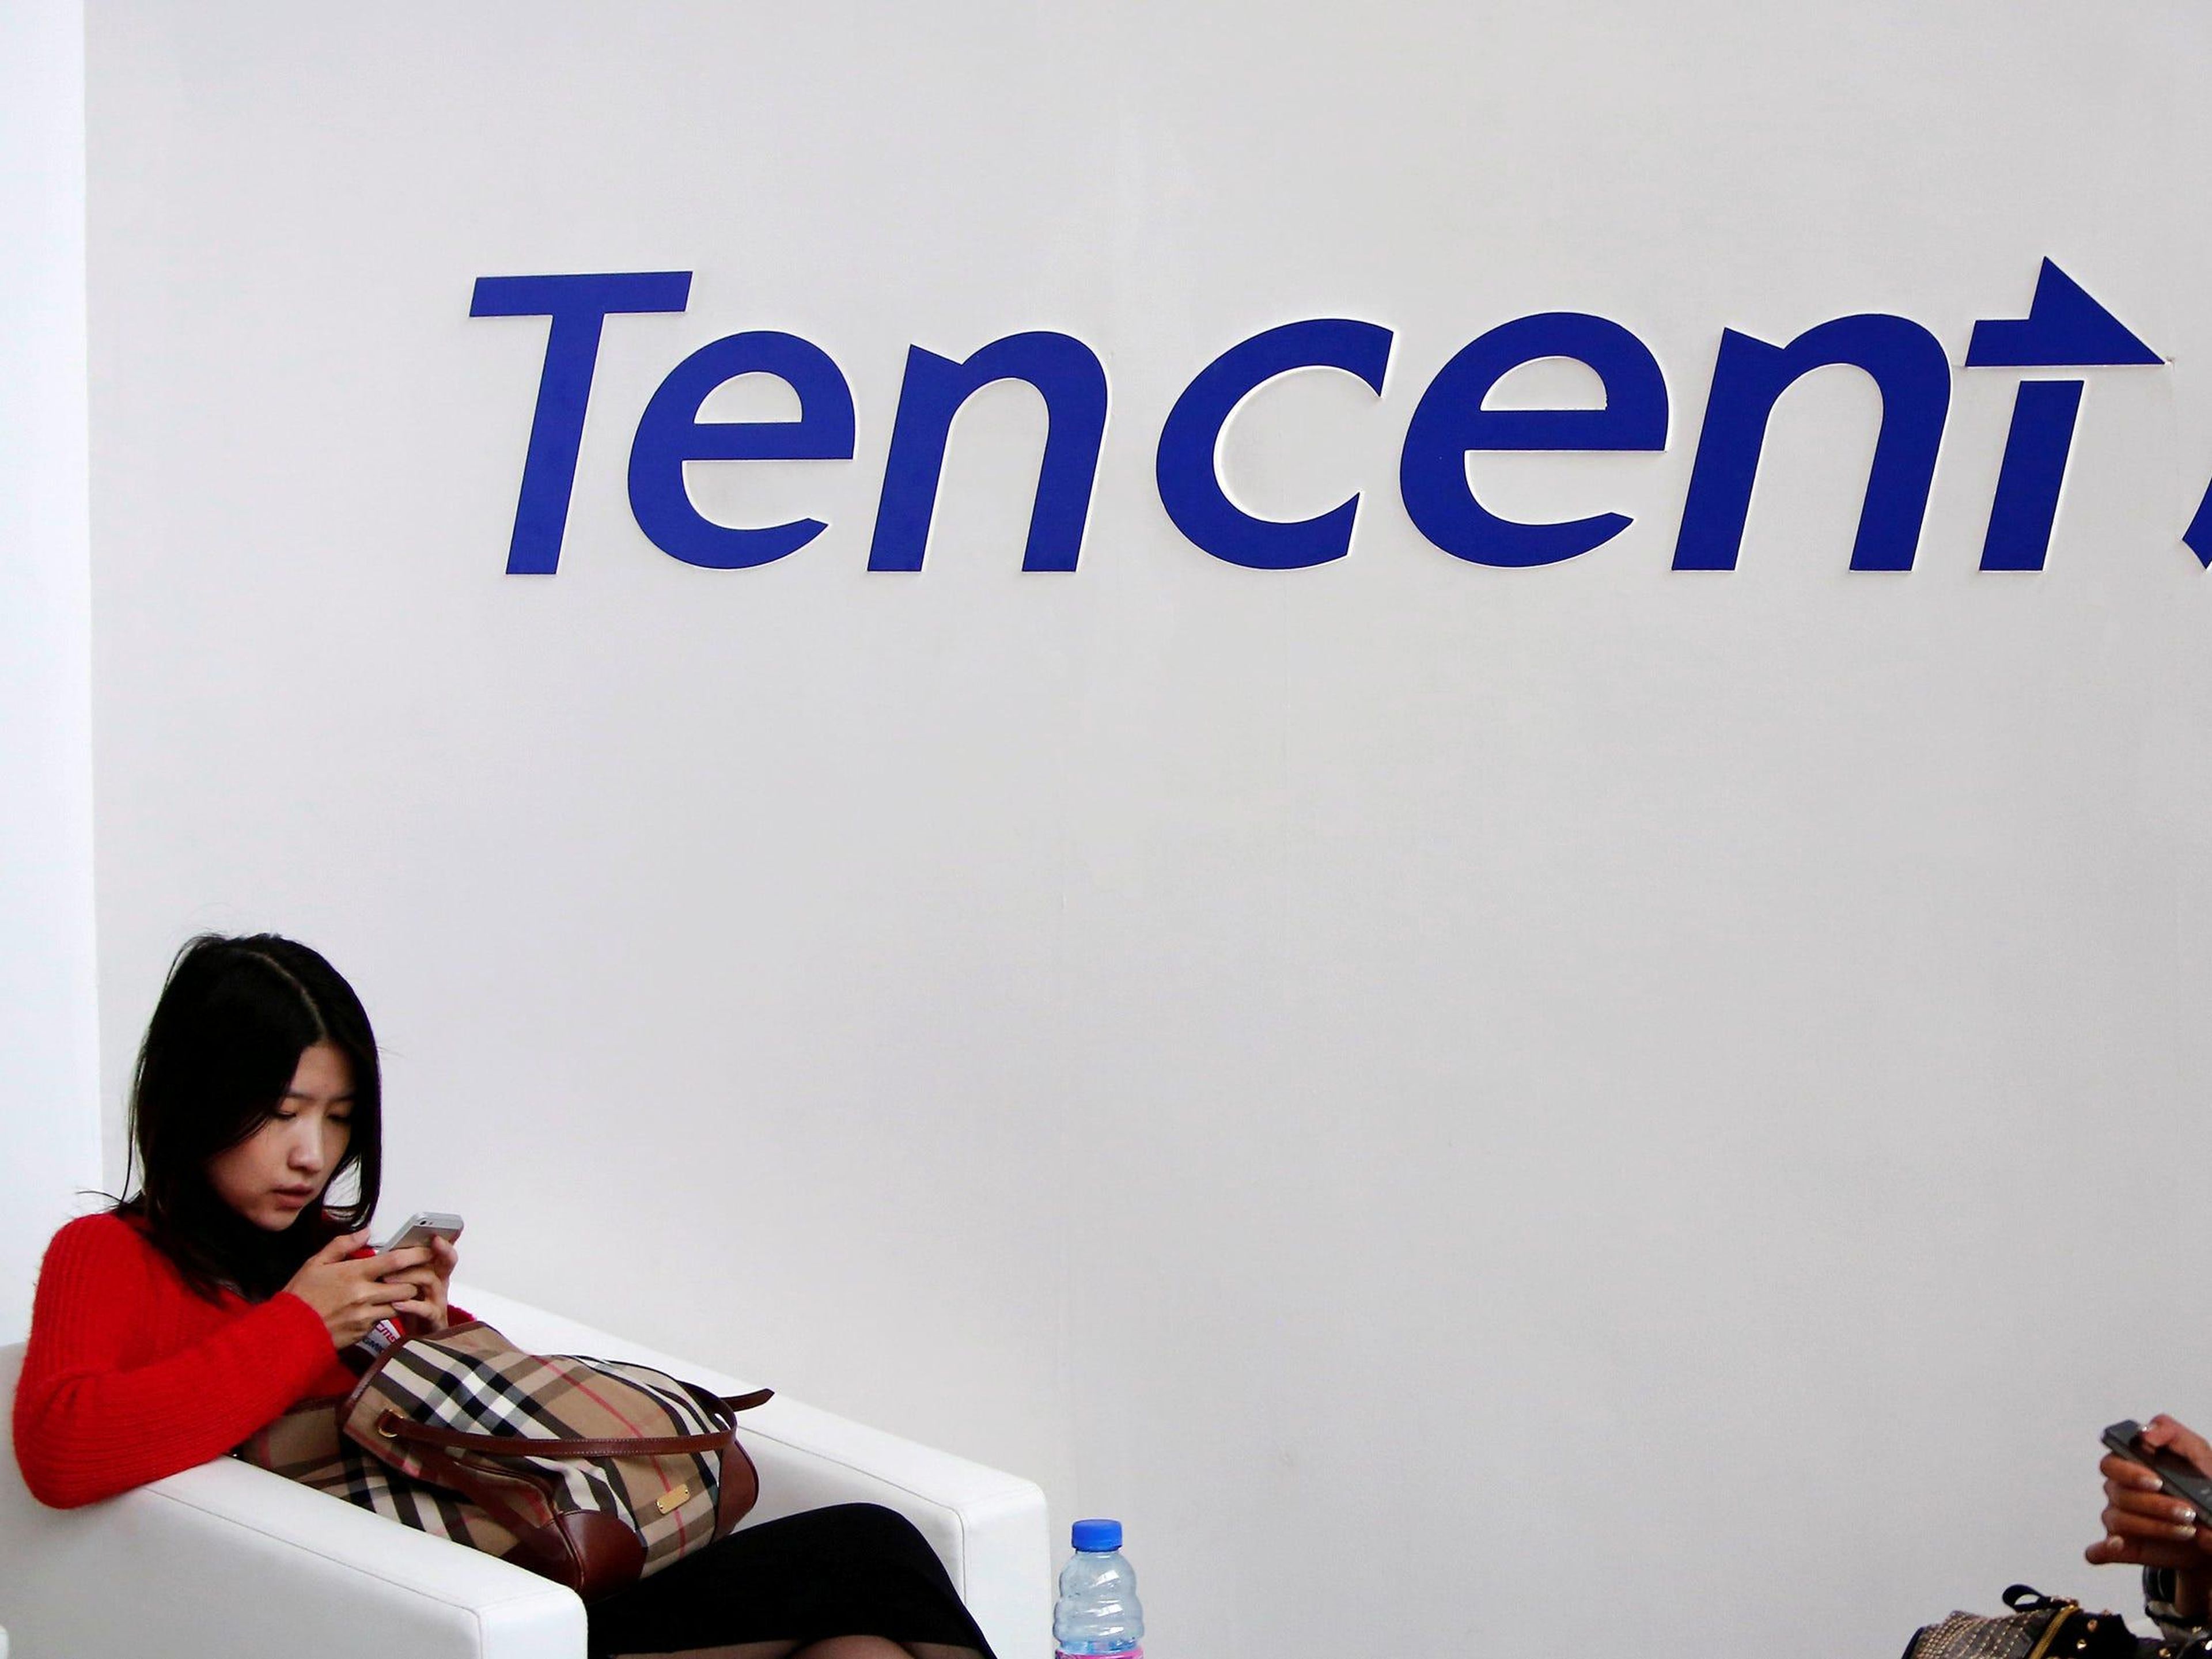 Tencent, a Chinese video game company, has asked its staff in Mainland China to work from home.